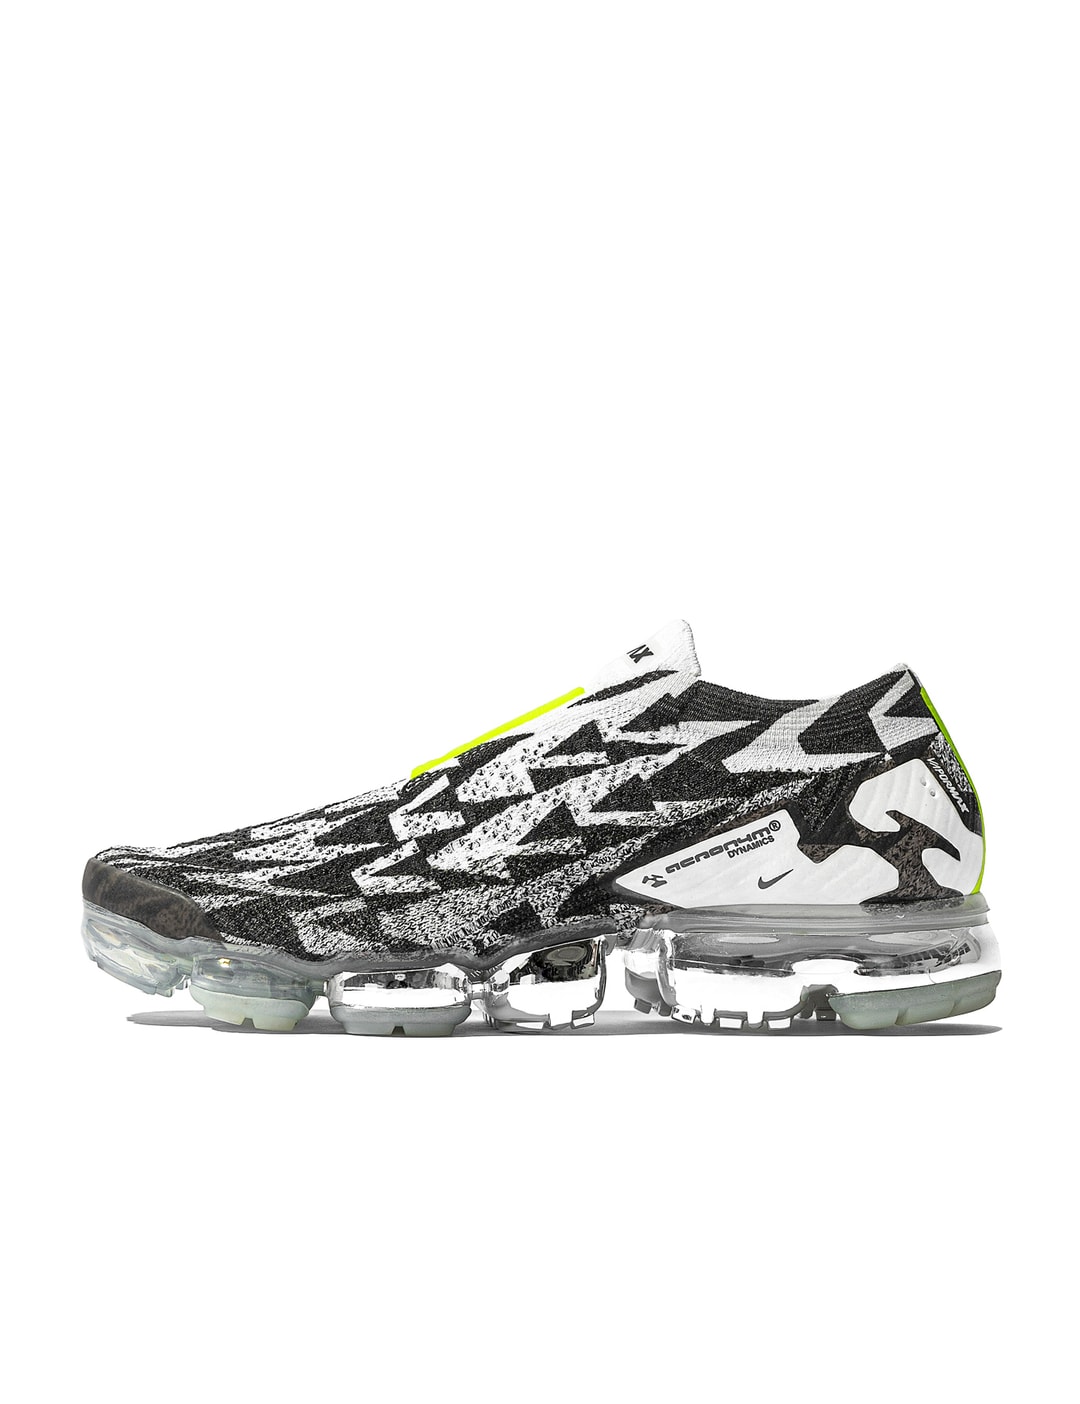 snigmord Springboard Isse ACRONYM - ACRONYM x Nike Air VaporMax F&F Chrome | HBX - Globally Curated  Fashion and Lifestyle by Hypebeast